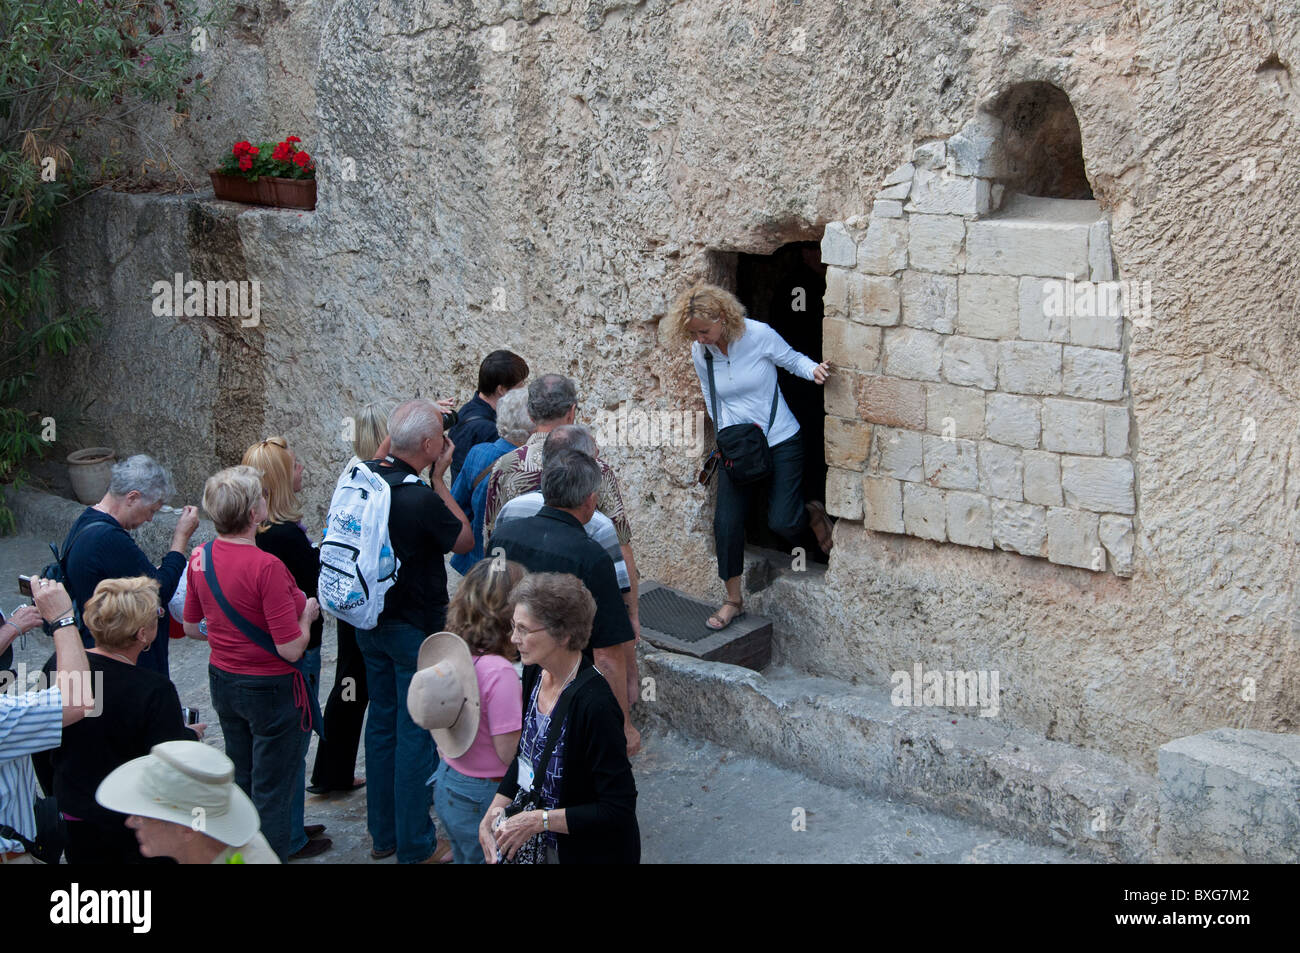 People waiting to enter the Garden Tomb. Stock Photo